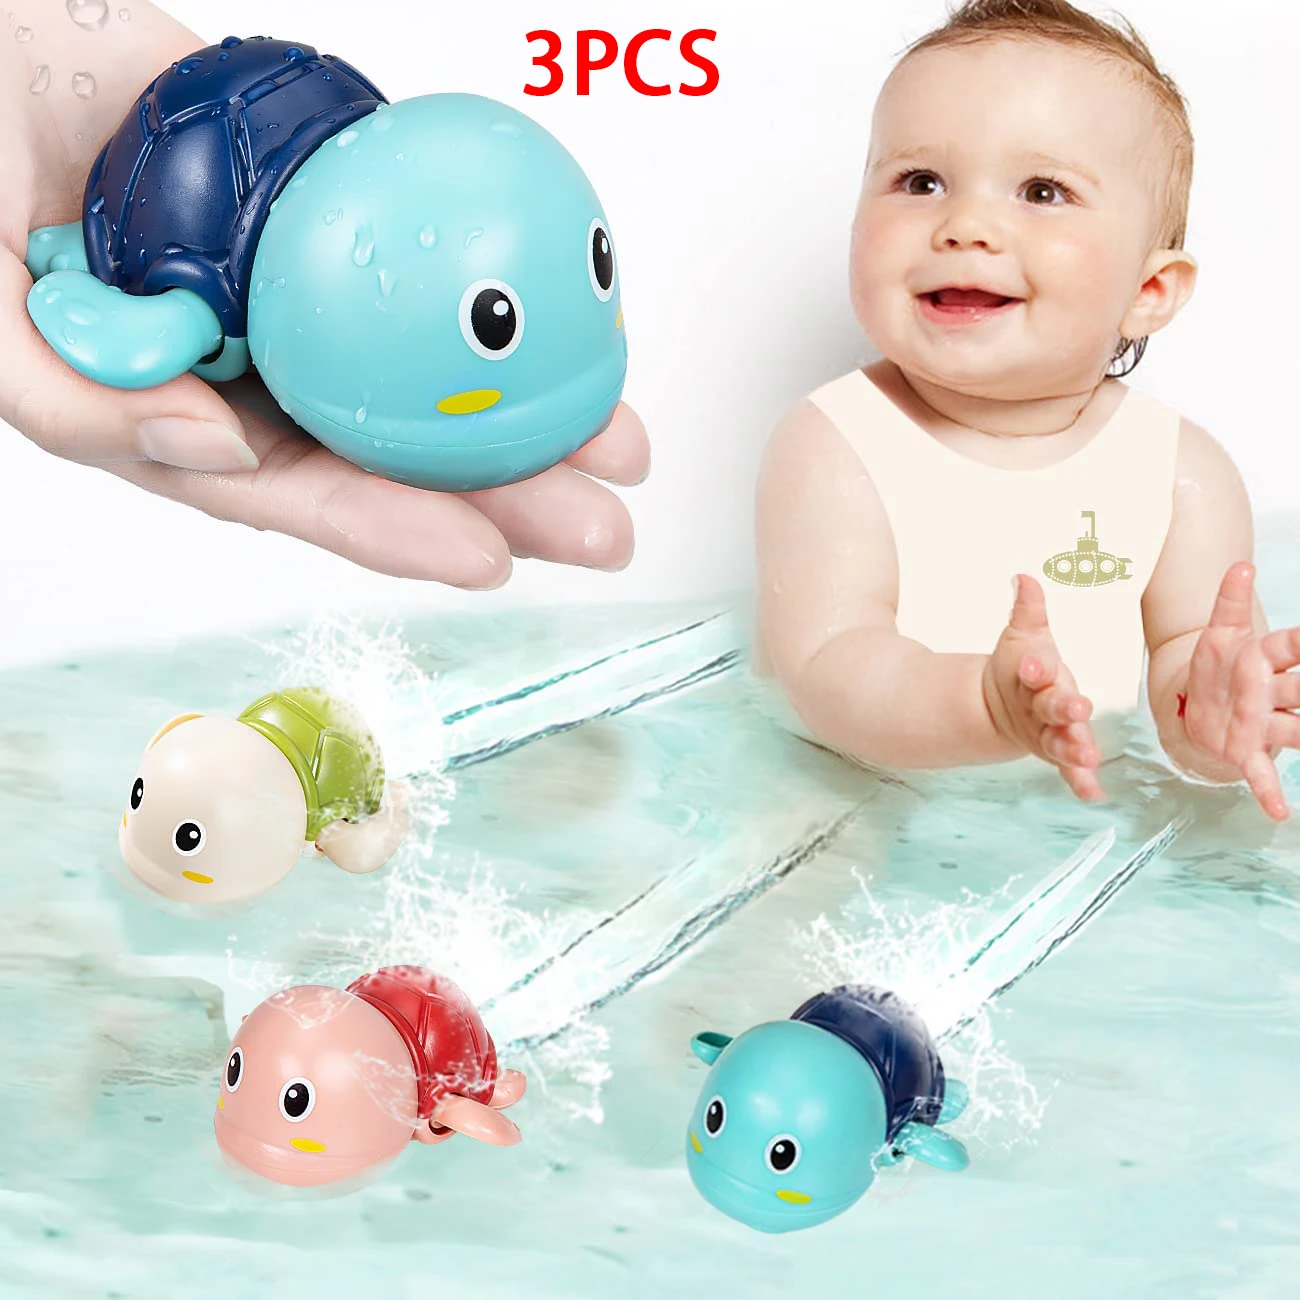 3PCS Baby Bath Toys Water Chain Clockwork Bathing Cute Swimming Turtle Toy - £9.99 GBP